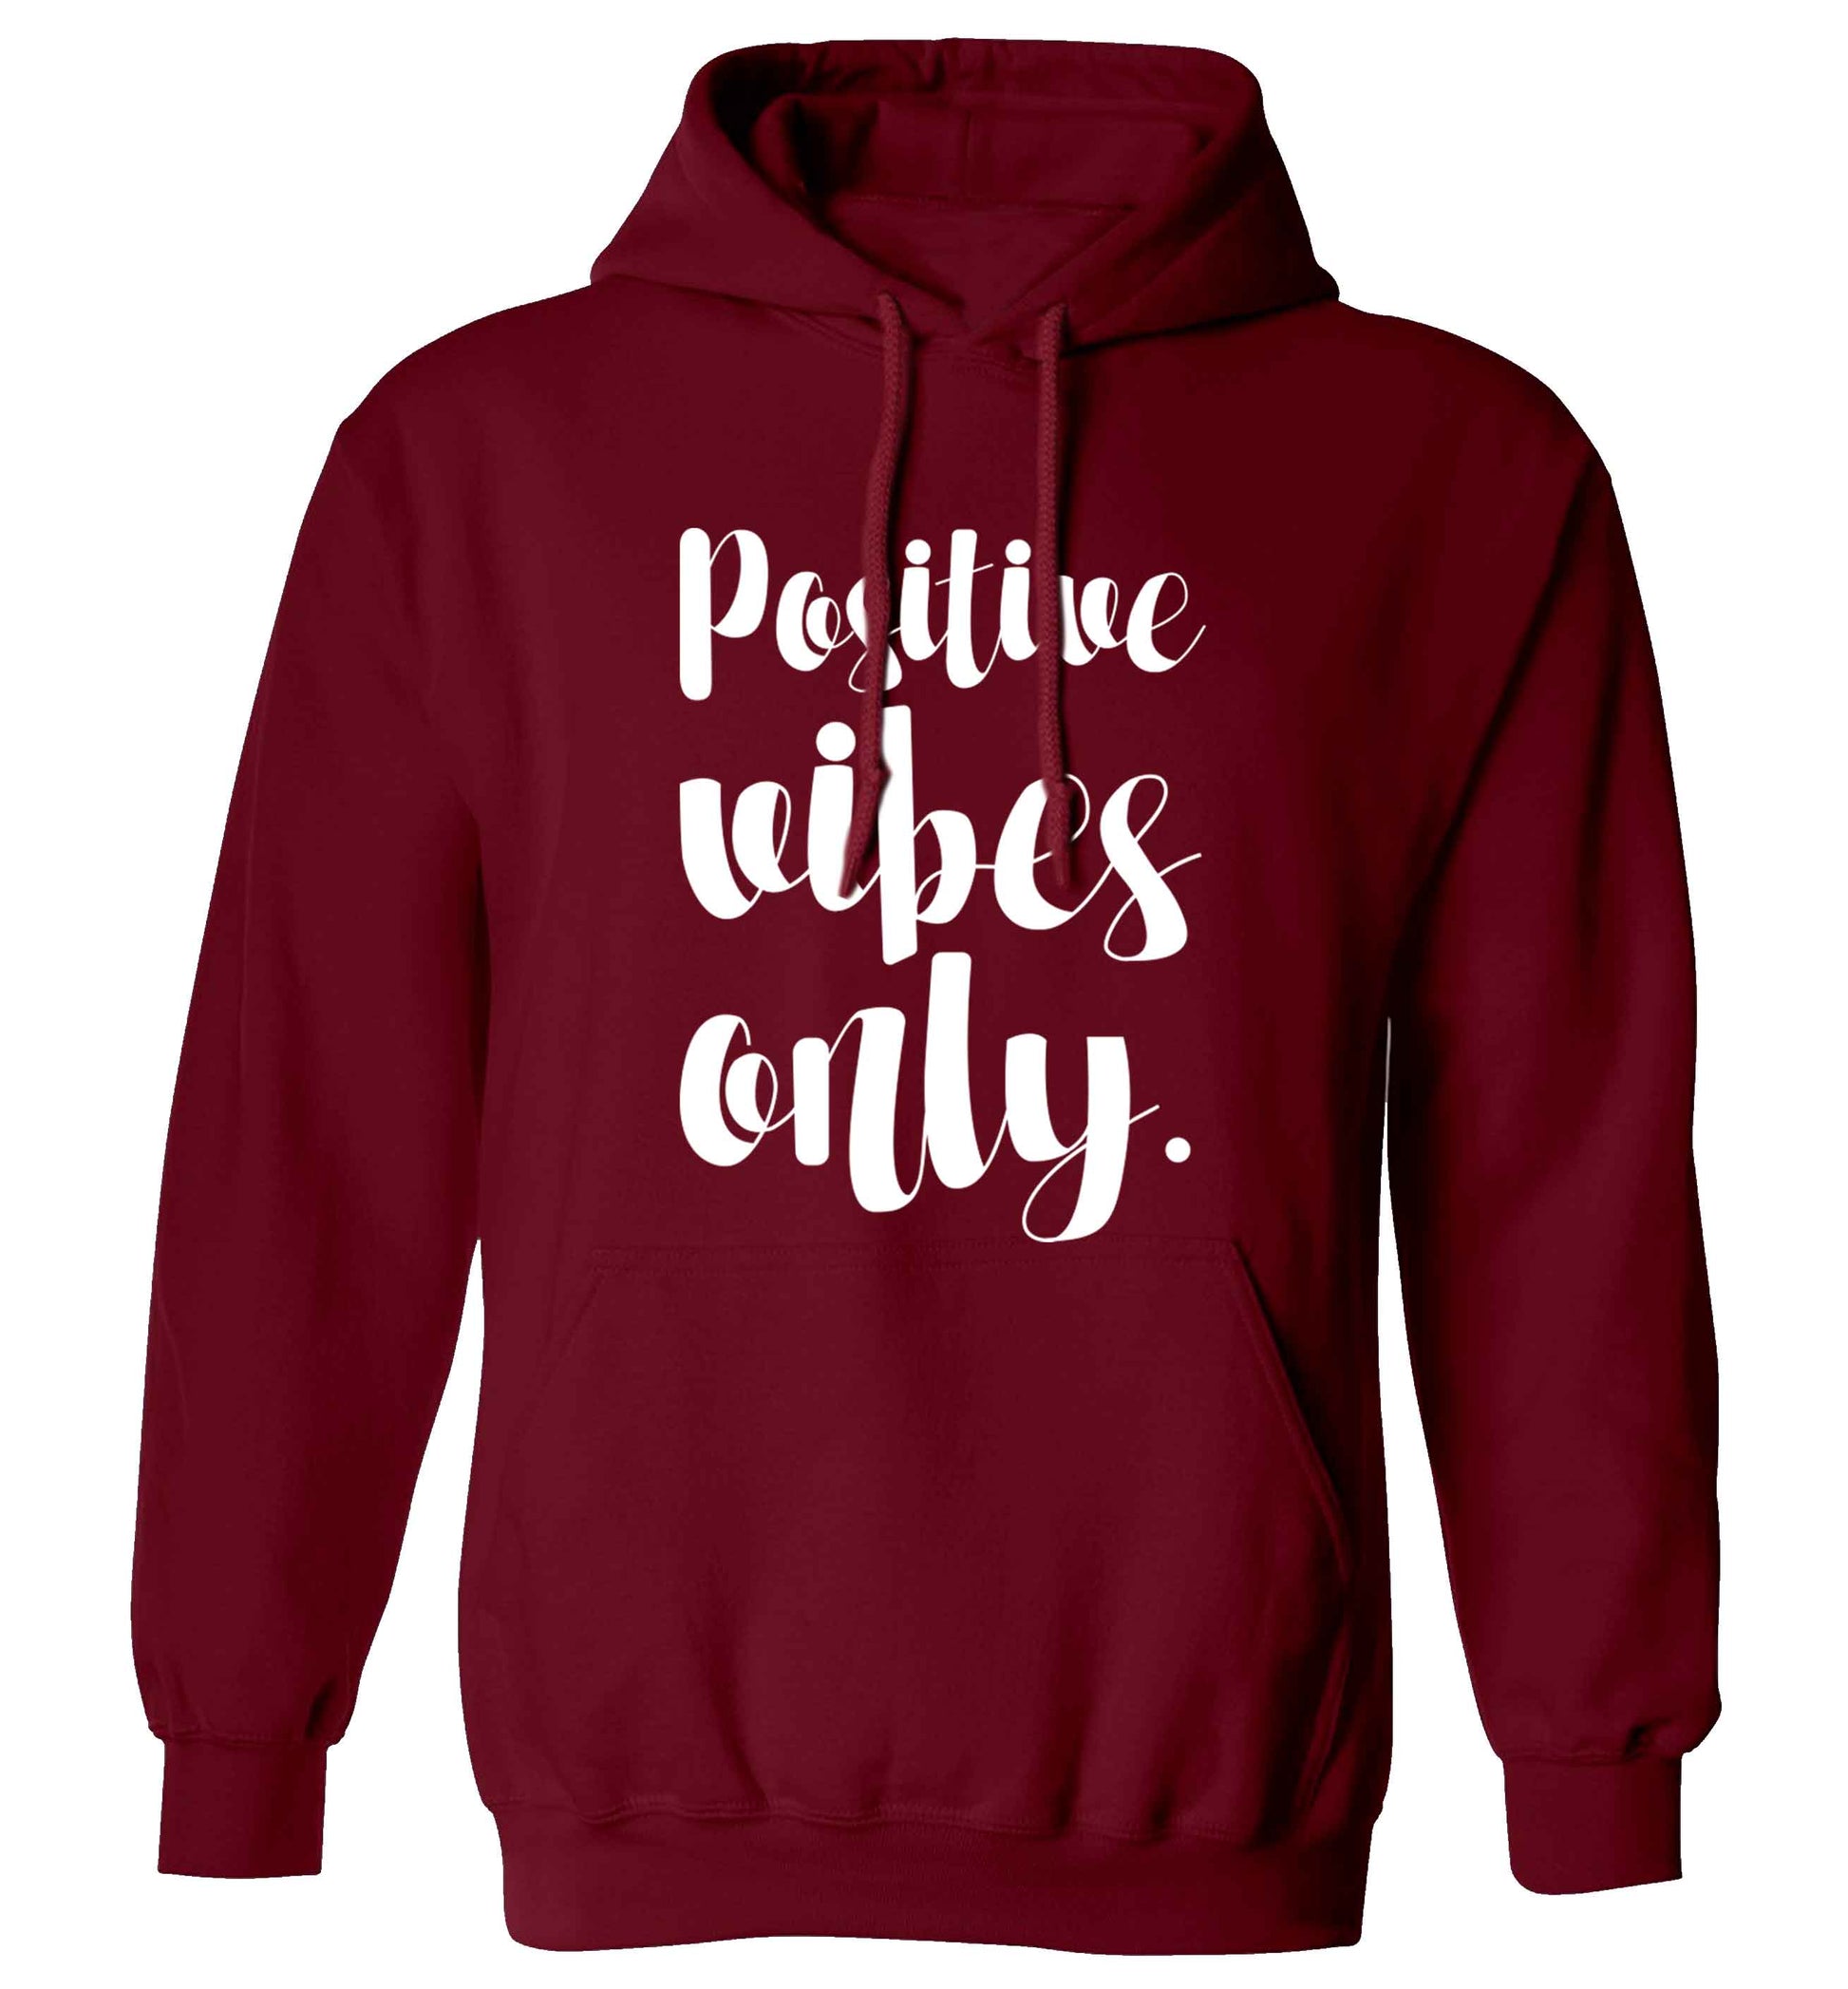 Positive vibes only adults unisex maroon hoodie 2XL